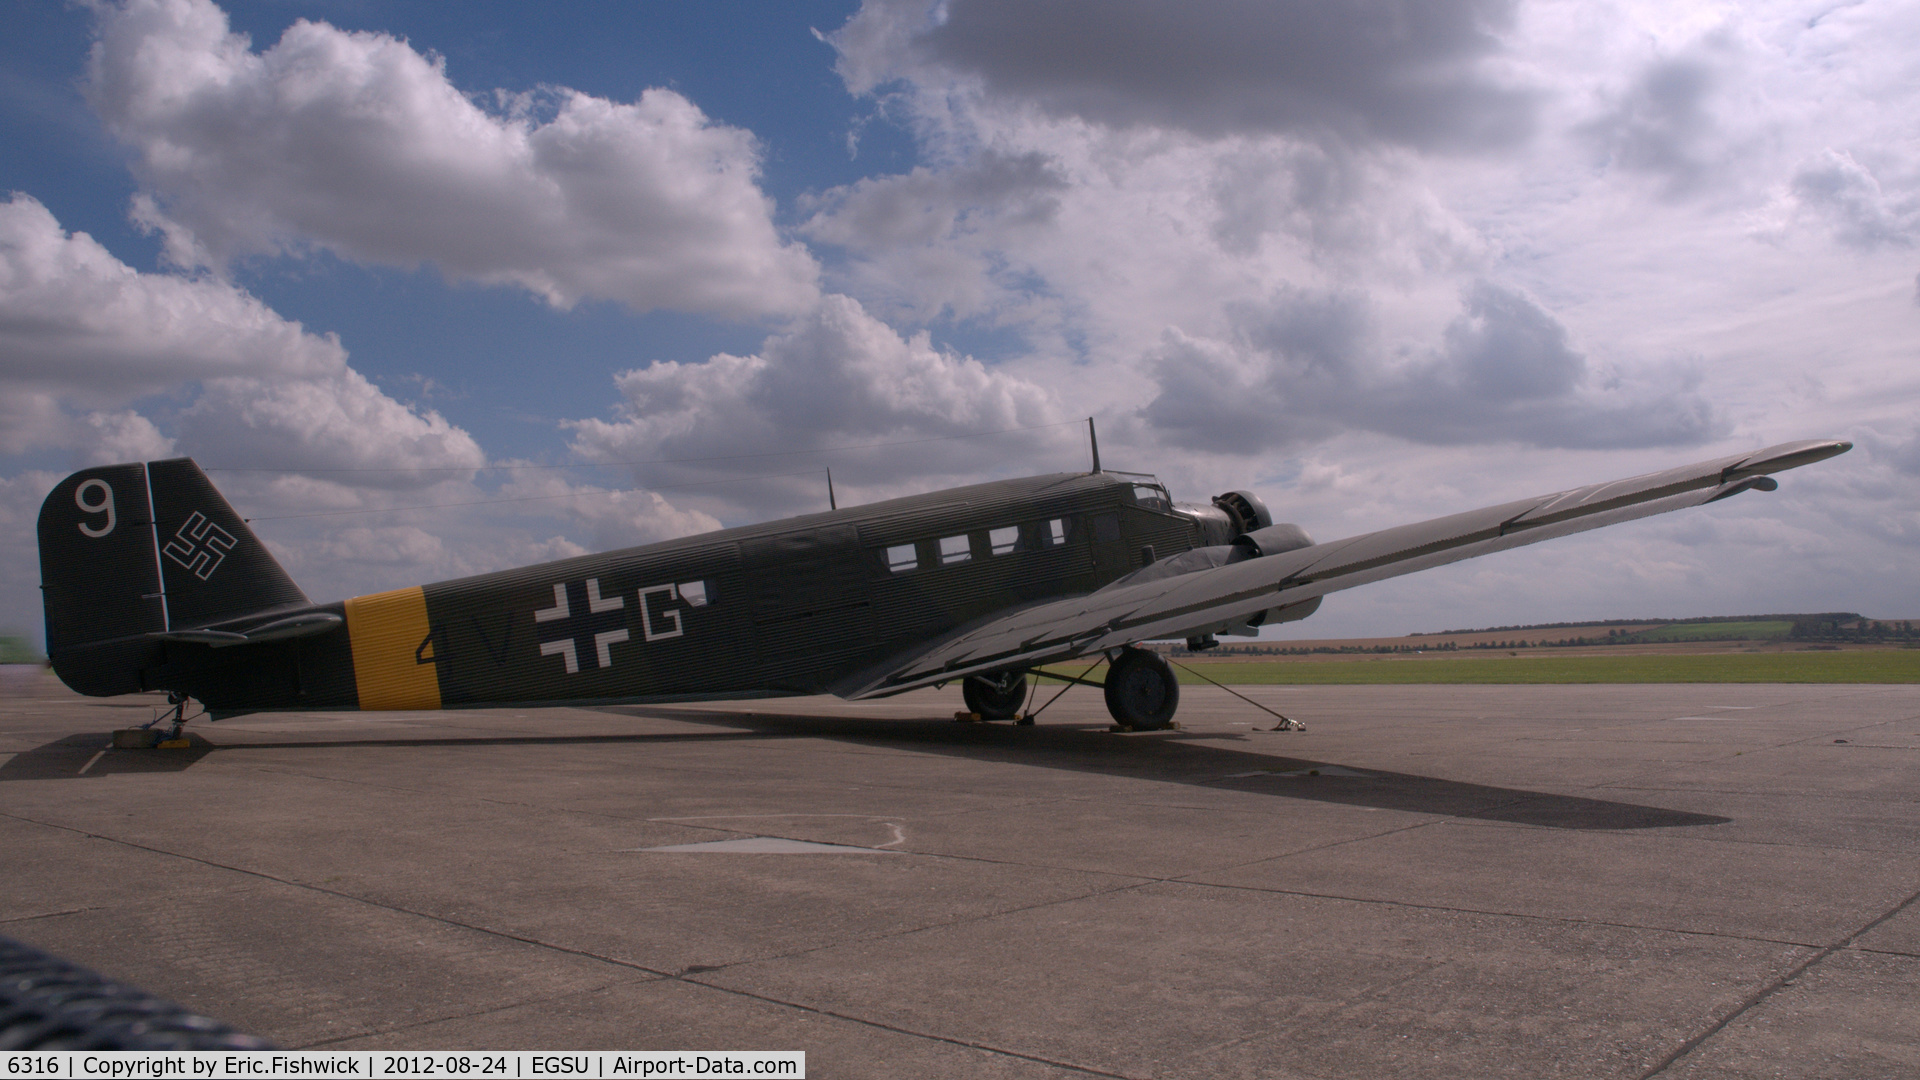 6316, Junkers (AAC) AAC-1 Toucan (Ju-52) C/N 255, 2. 6316 at The Imperial War Museum, Duxford.